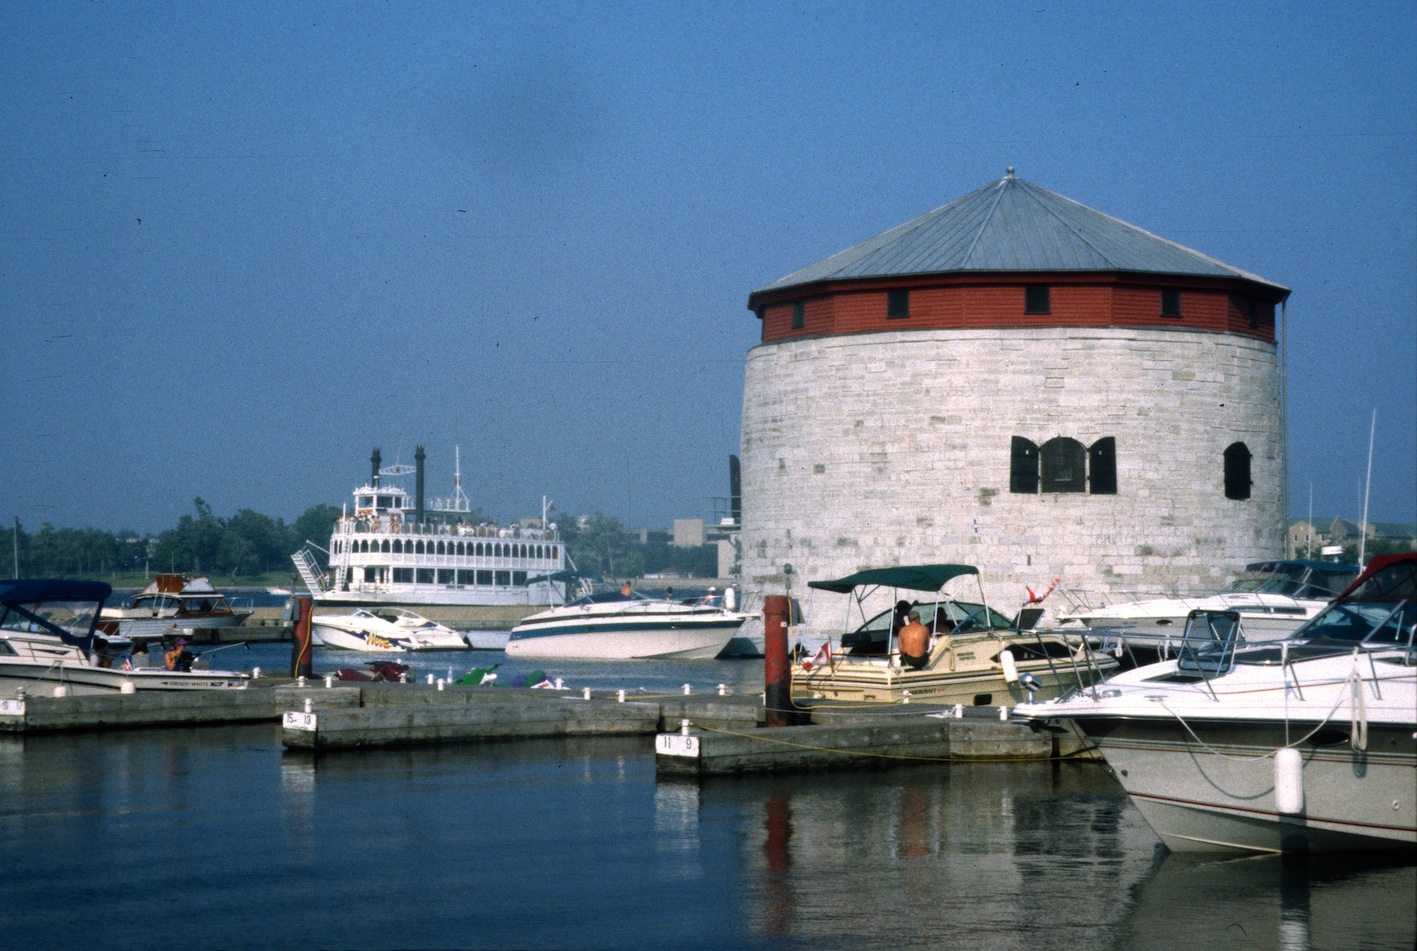 Martello Tower at Kingston on the Rideau Canal Sea Doo tour